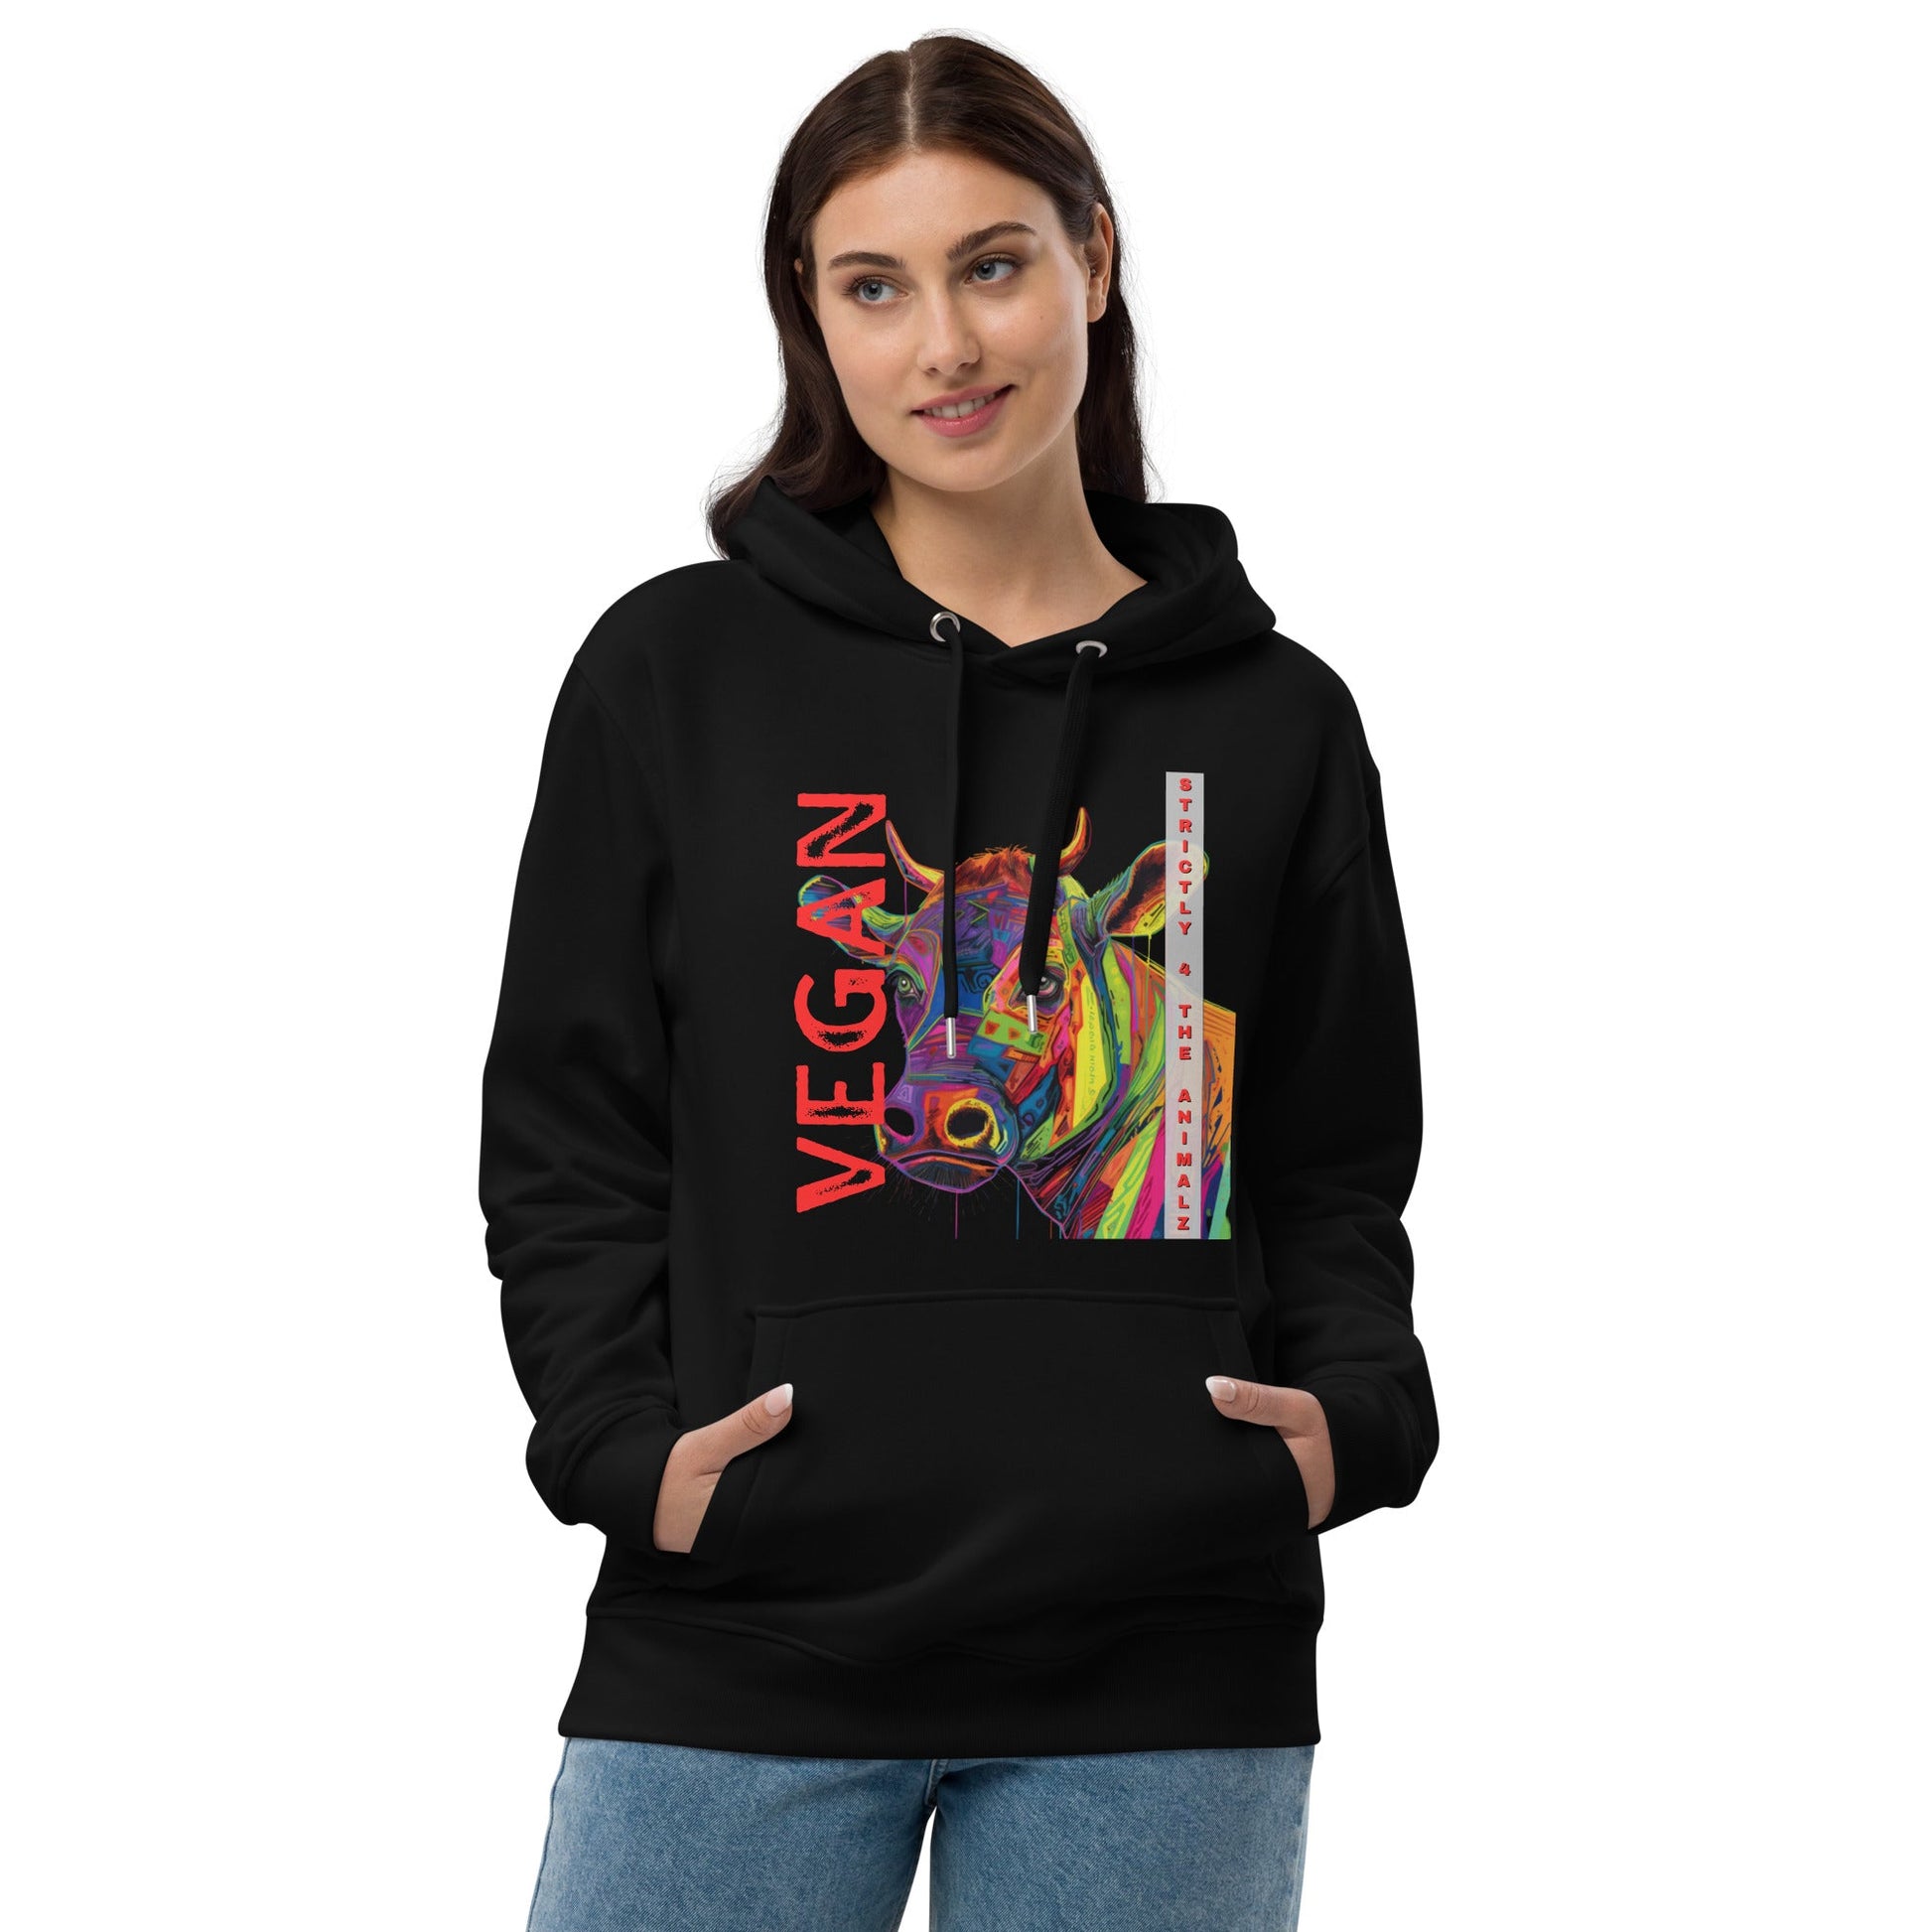 Strictly 4 the A.N.I.M.A.L.Z. Hoodie - For Health For Ethics - Black